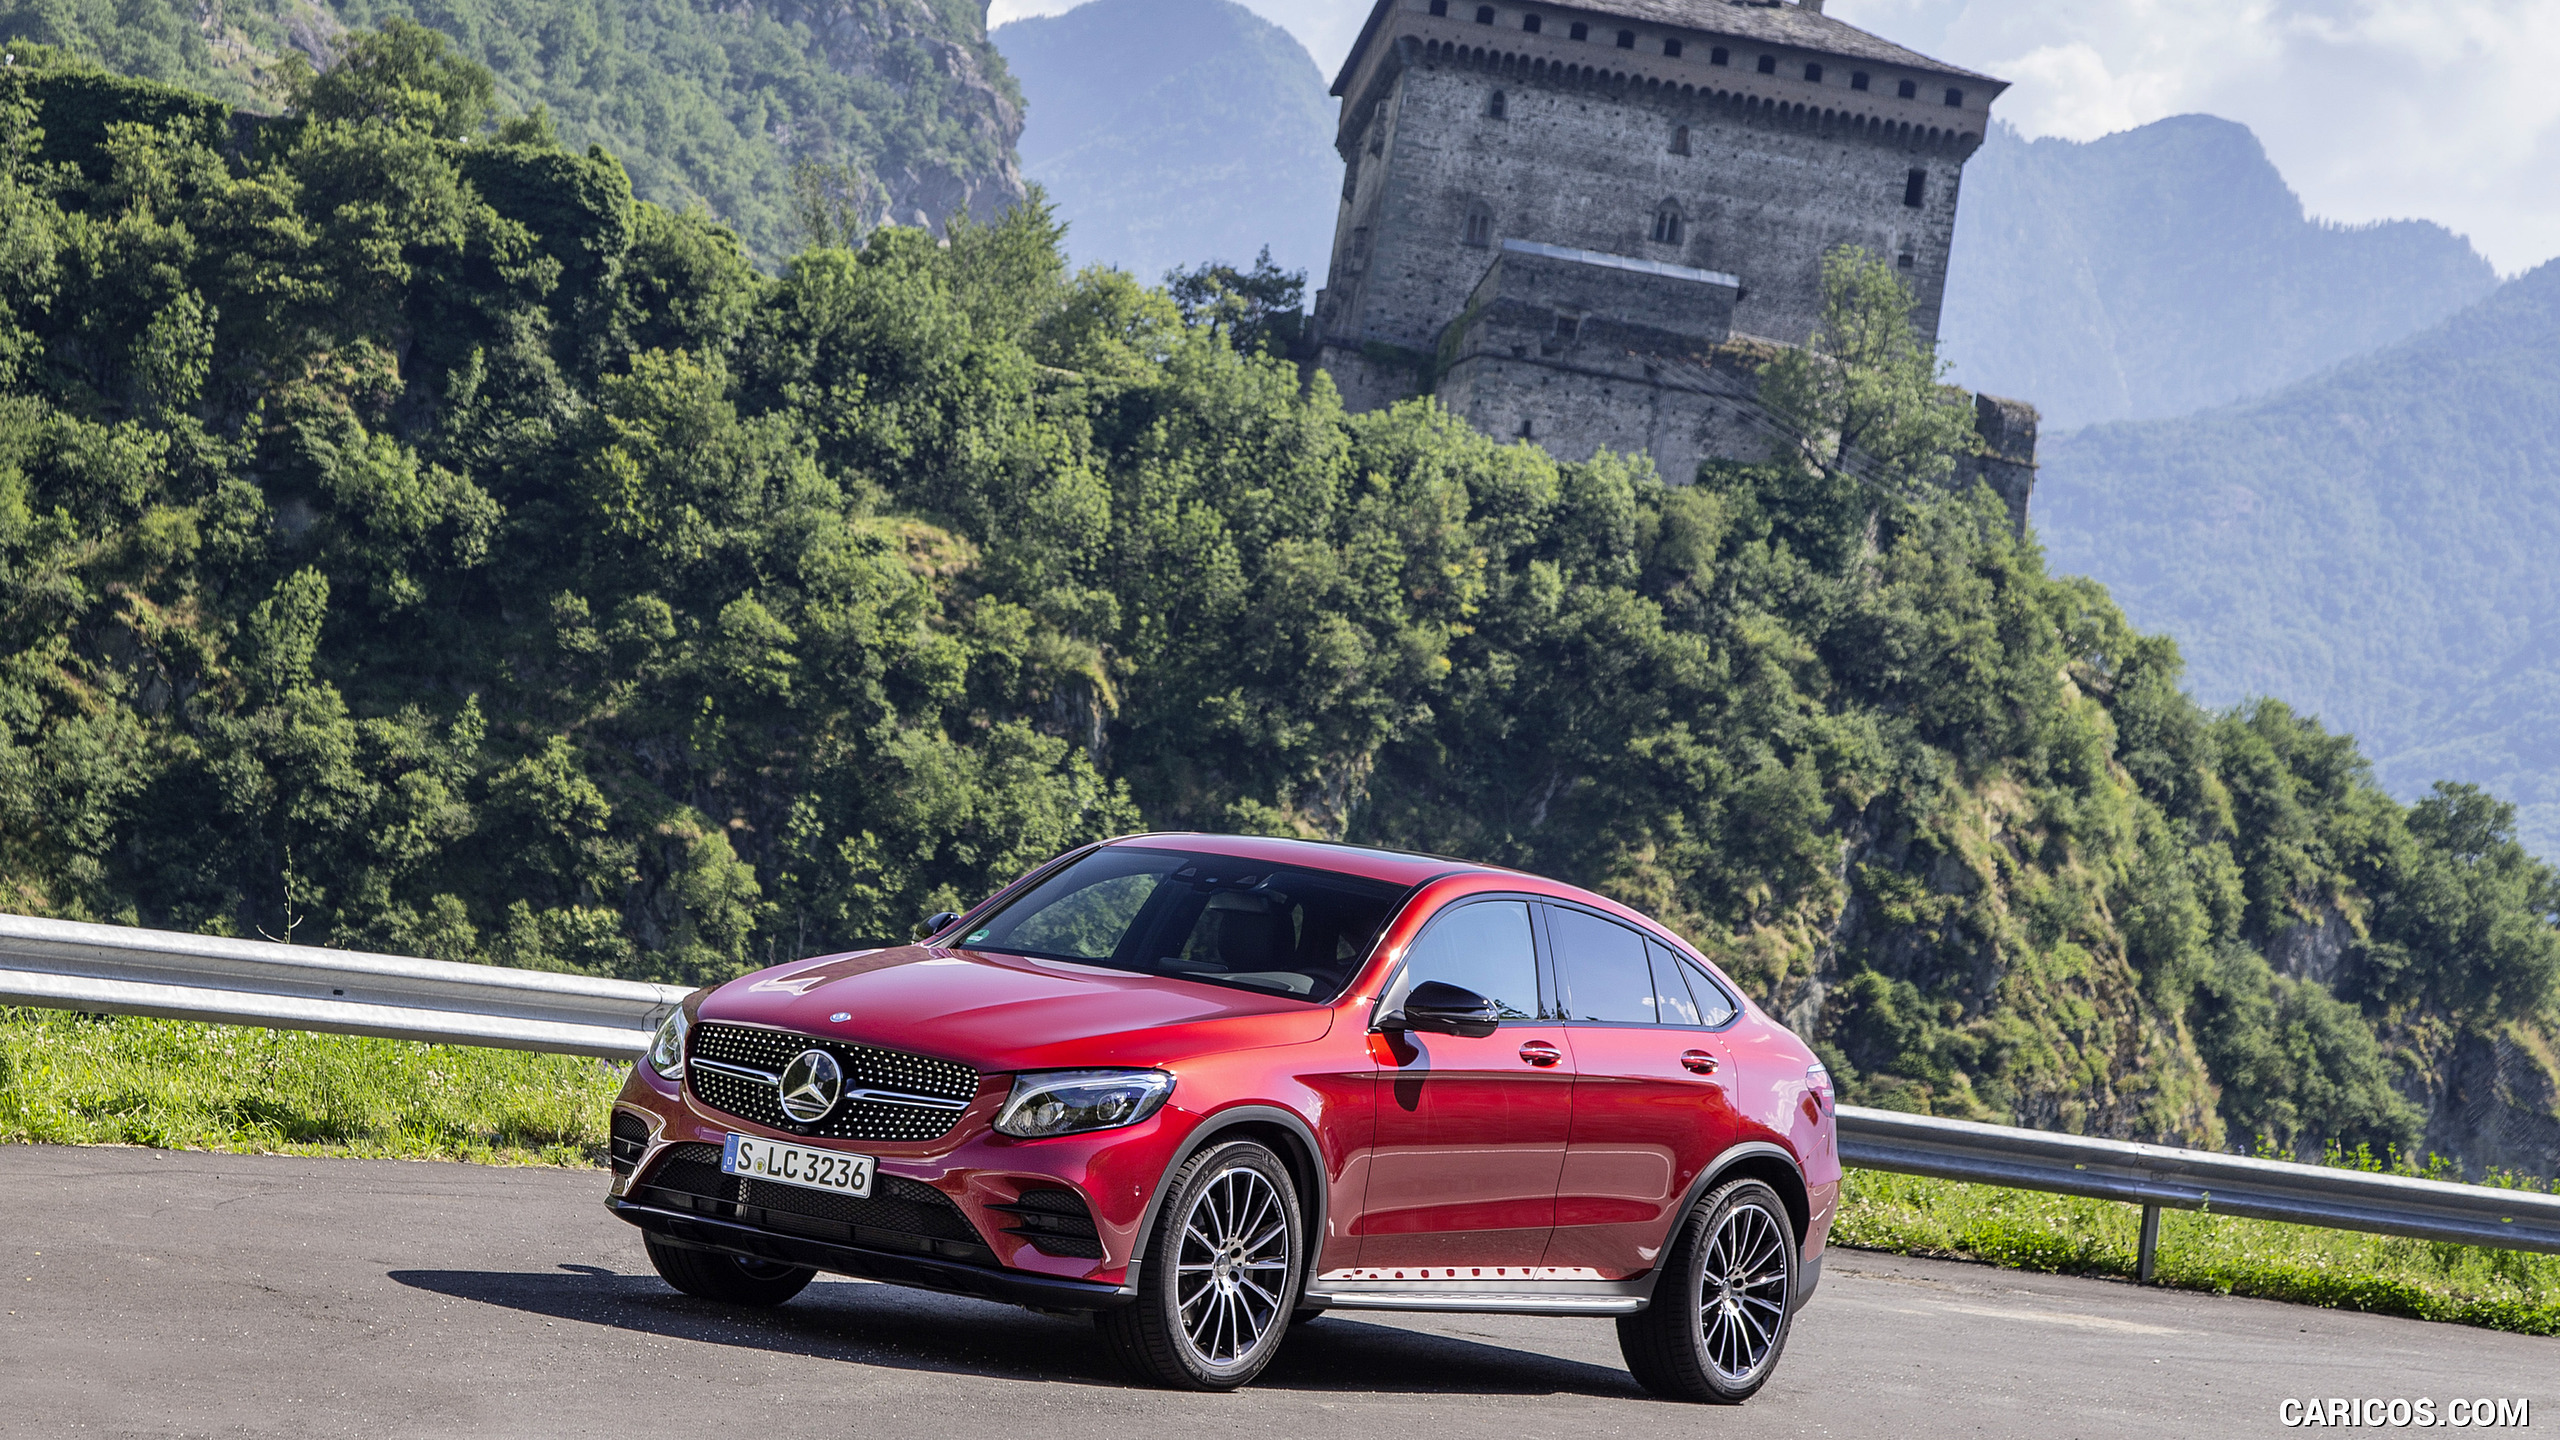 2017 Mercedes-Benz GLC 350 d Coupe (Diesel; Color: Hyacinth Red) - Front Three-Quarter, #71 of 144